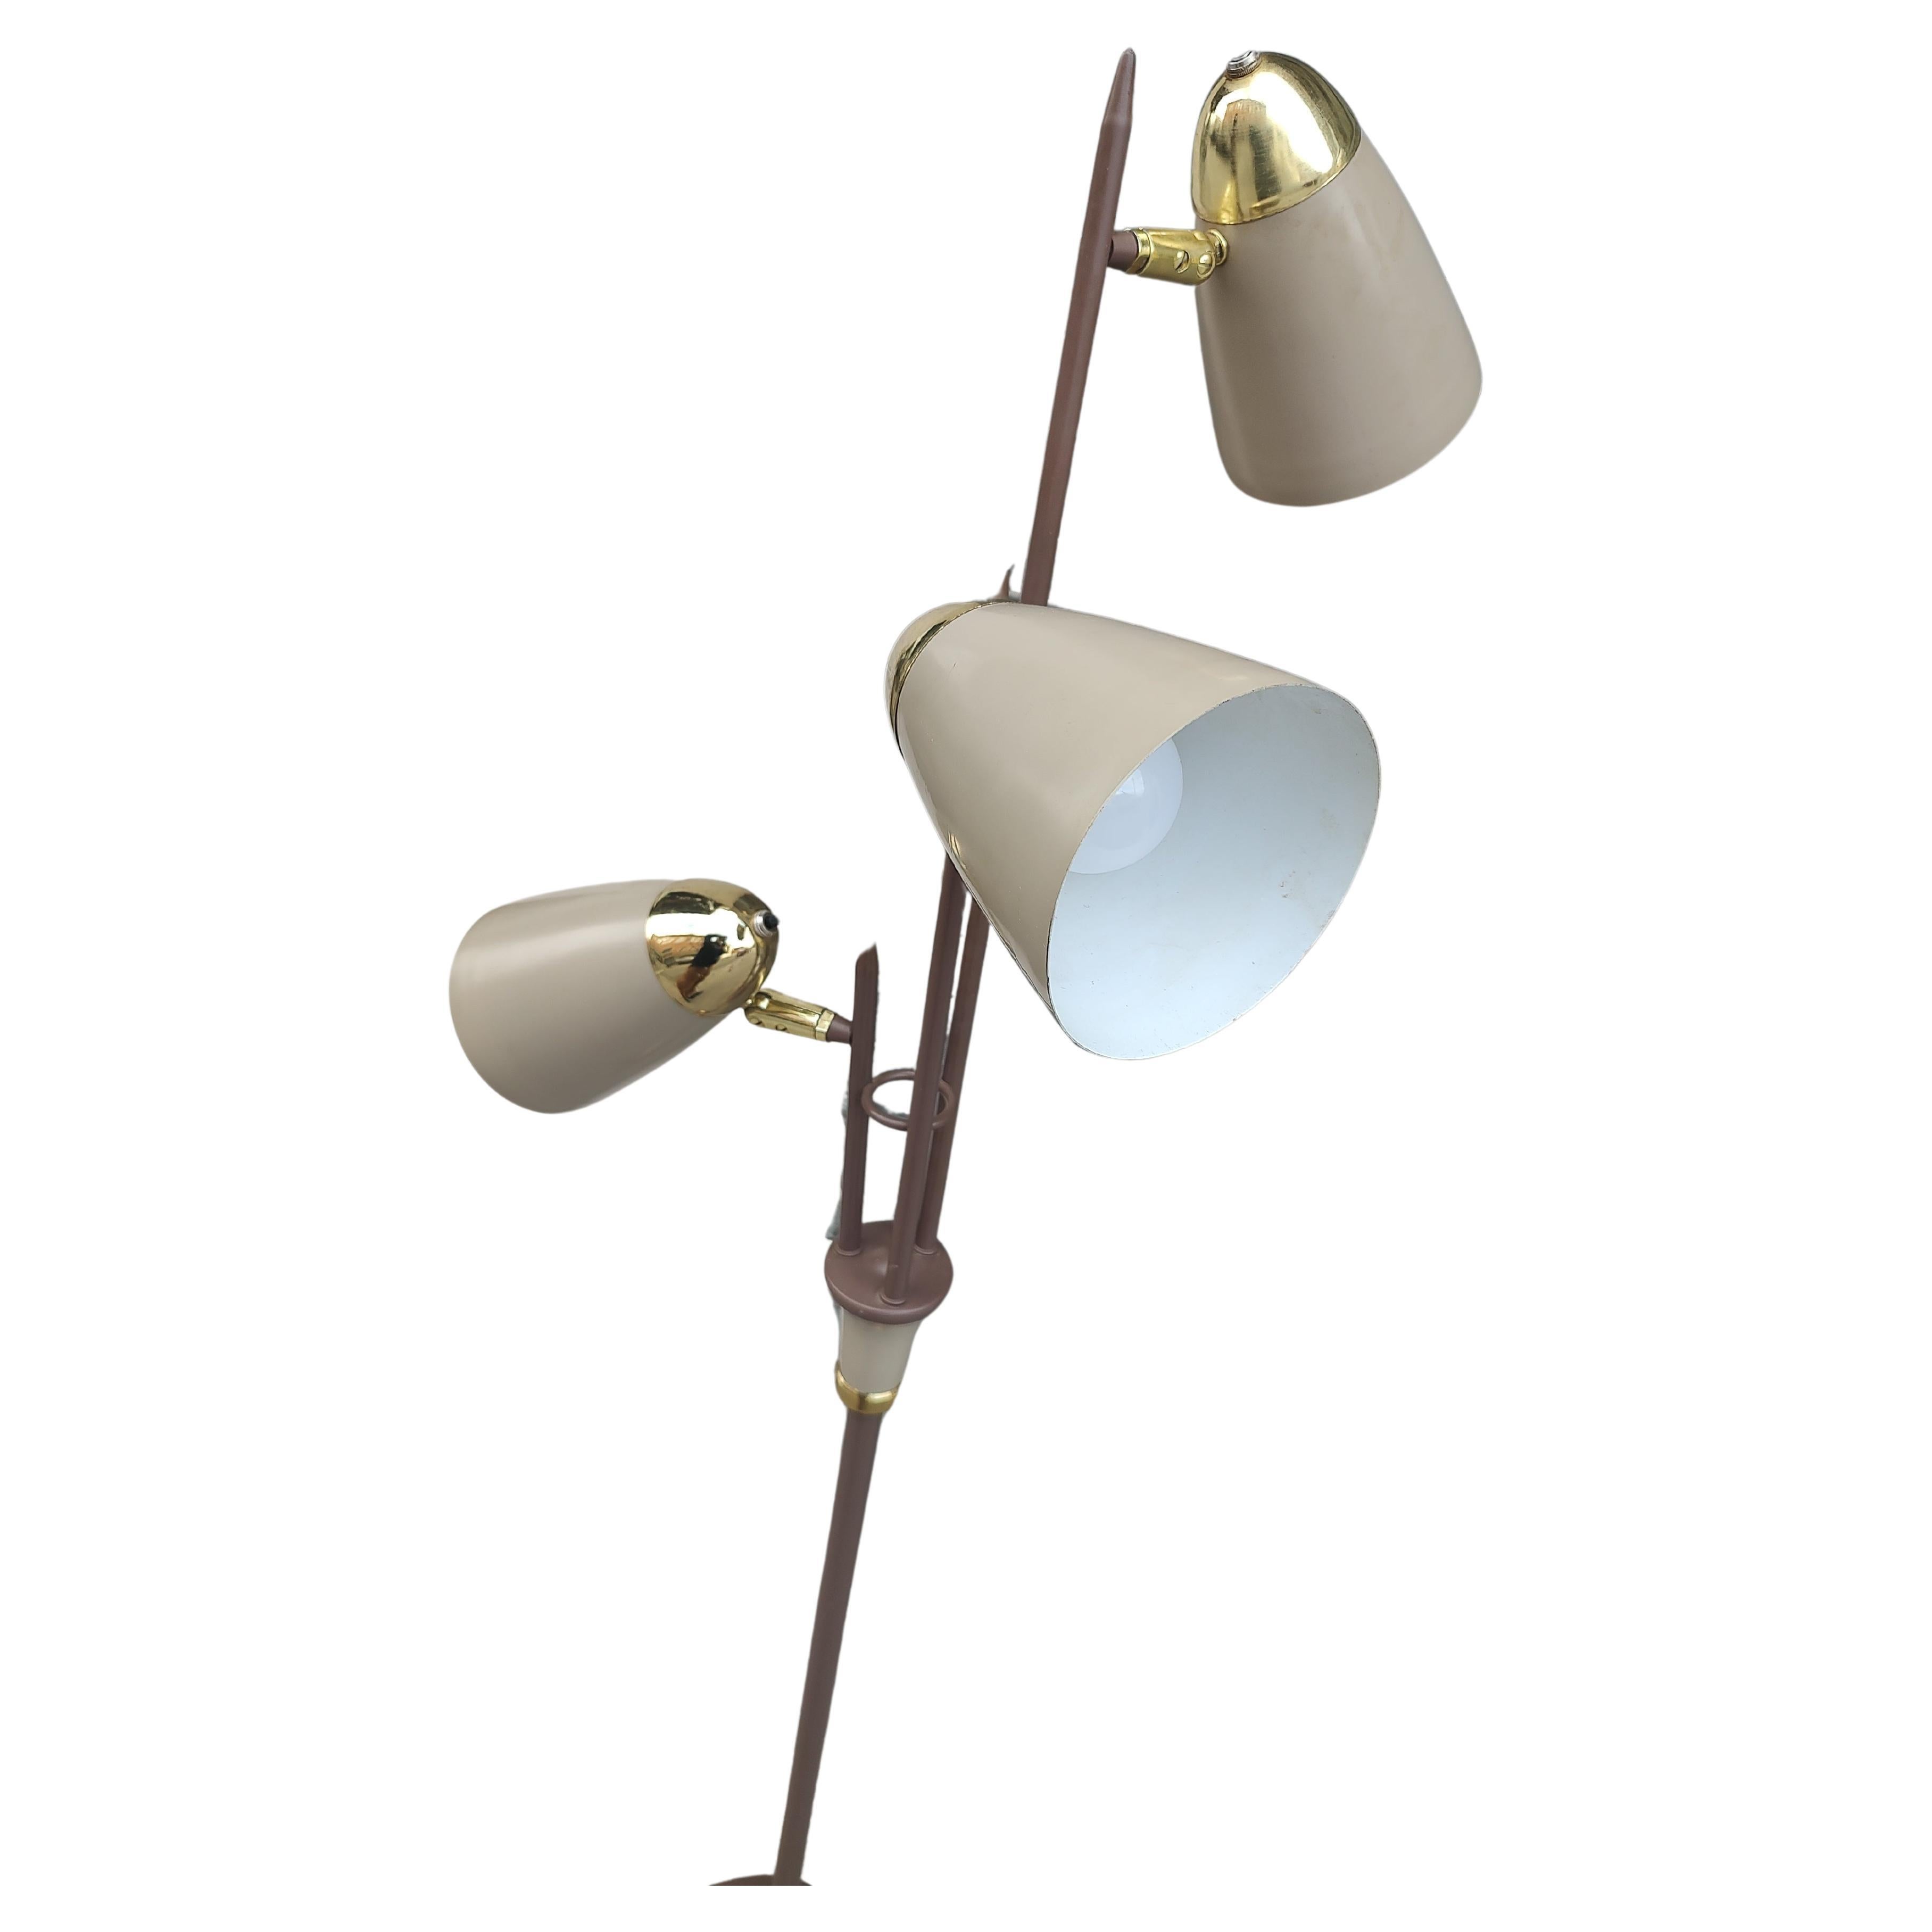 Painted Mid Century Modern Triennial Floor Lamp by Gerald Thurston for Lightolier C1965 For Sale